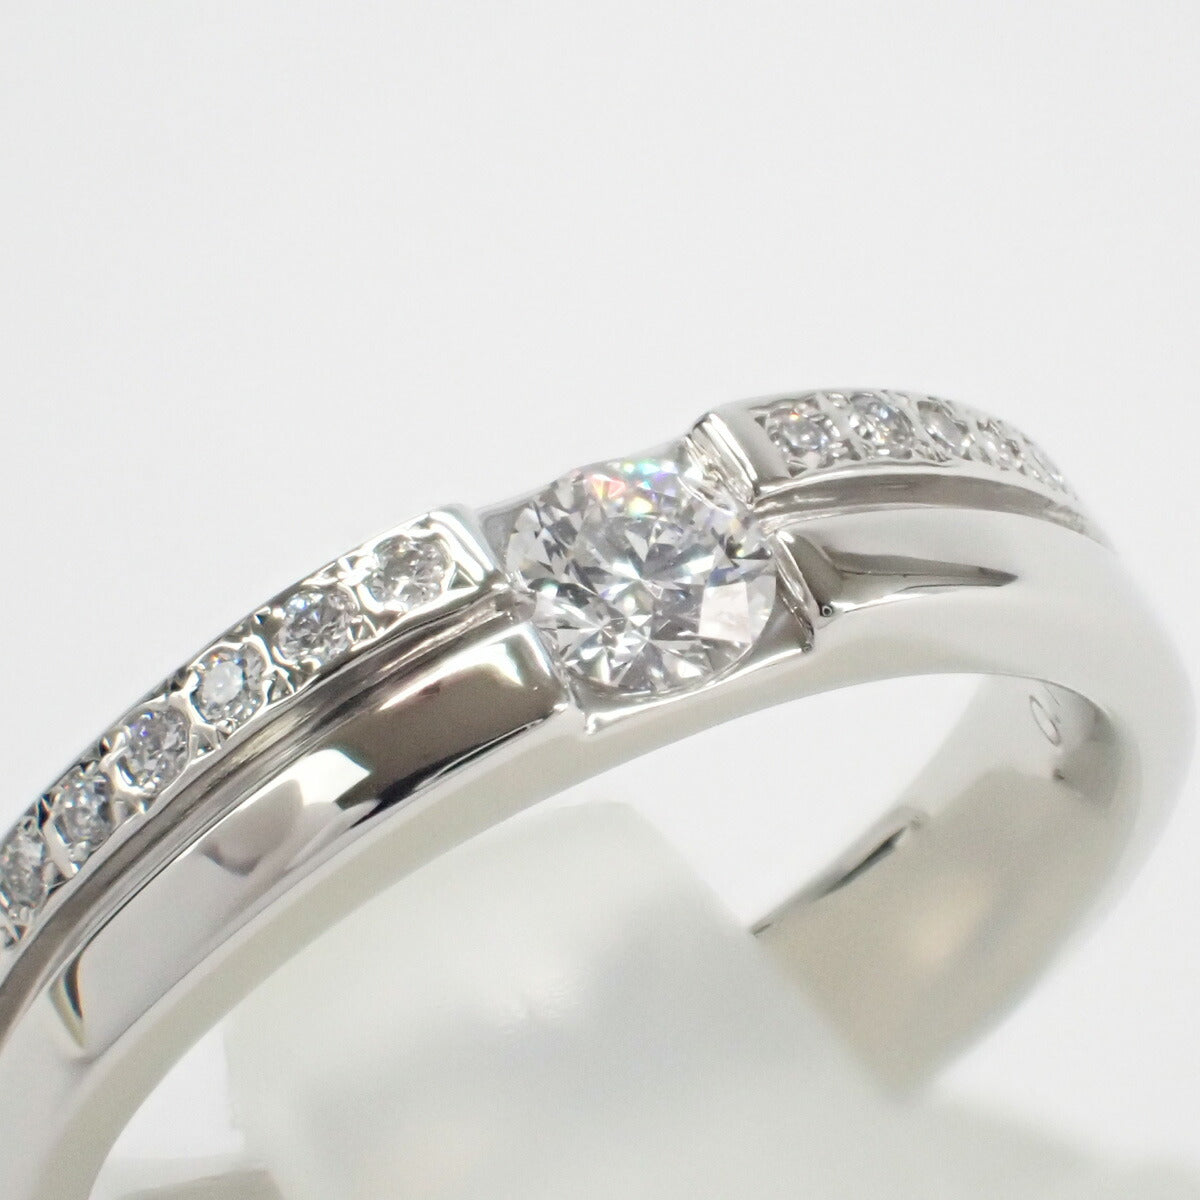 4℃ Design D0.171ct, approx. Gauge 9.5 Ring - PT1000 with Diamond, 9.5 Silver For Women【Pre-Owned】